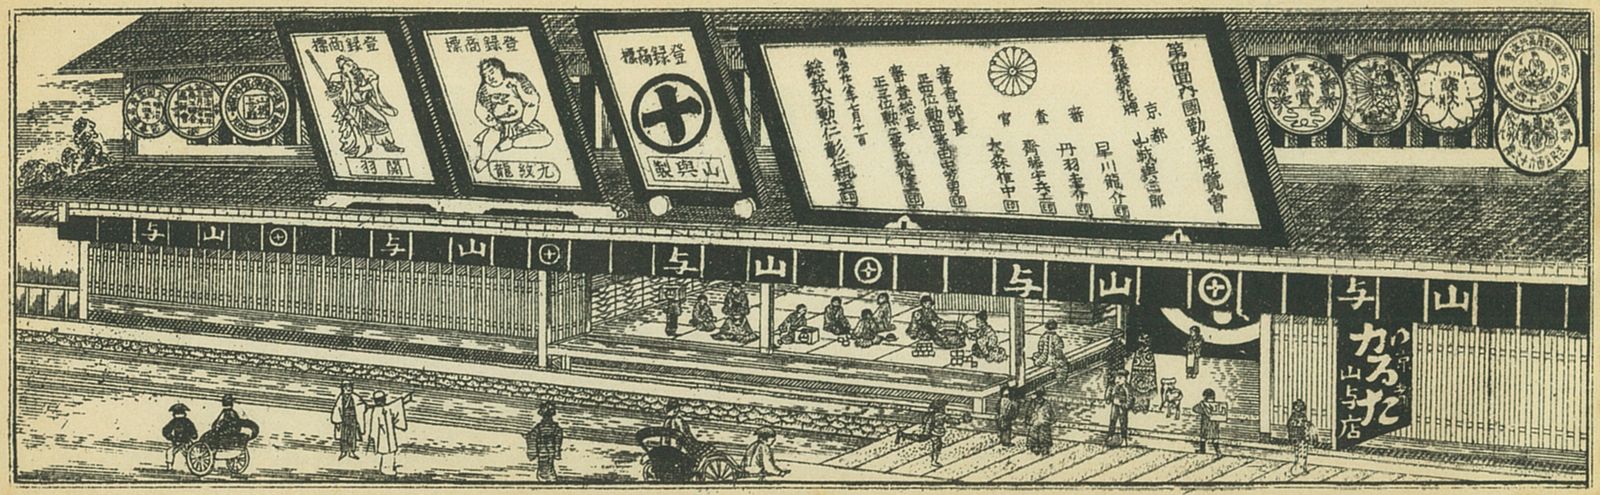 The frontage of a very wide Japanese store, with signs depicting several figures.